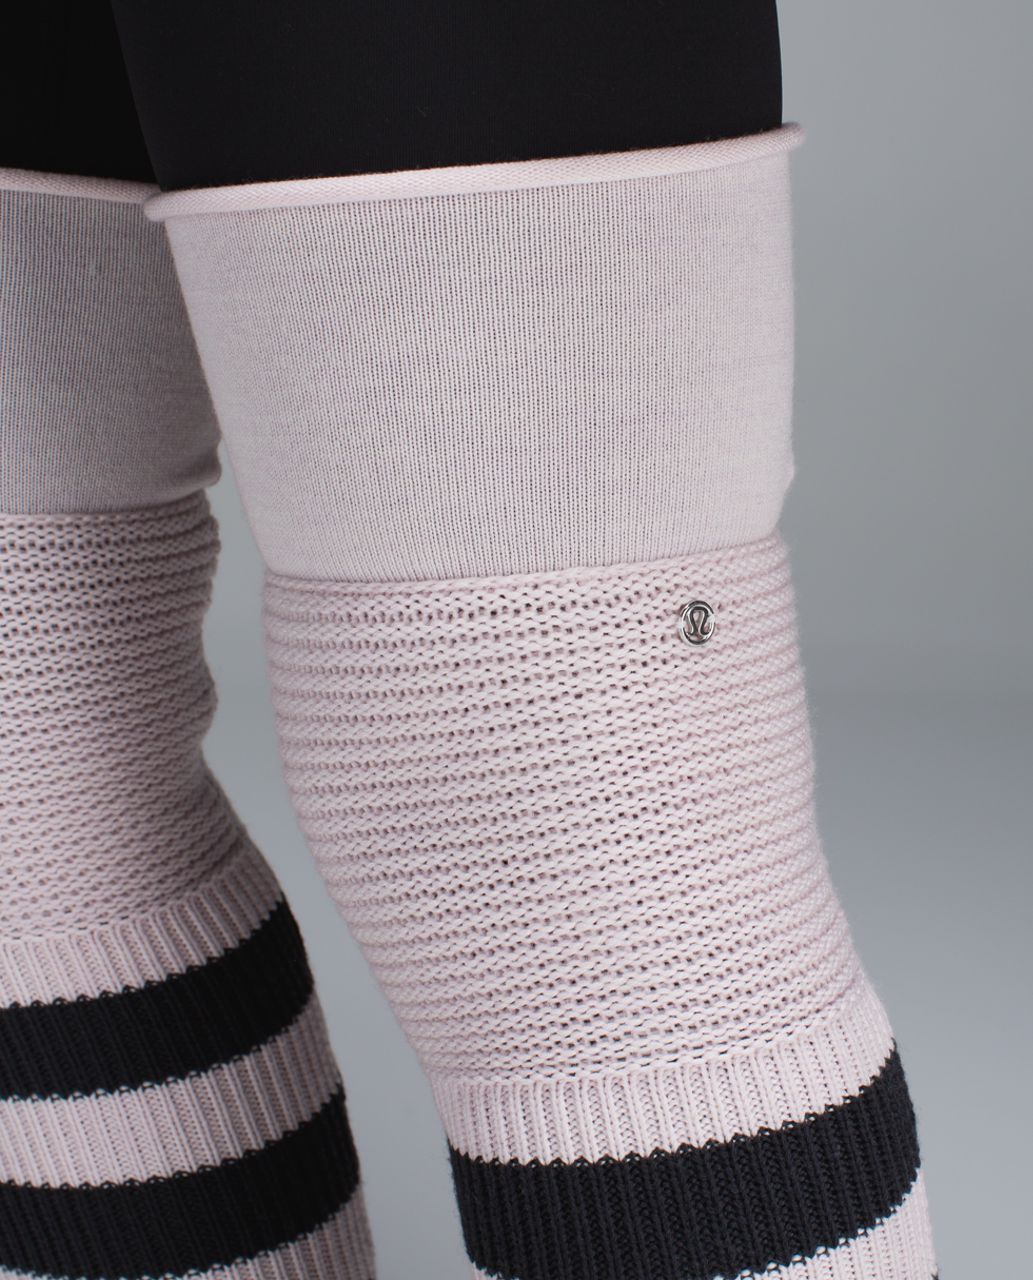 Lululemon Blissed Out Leg Warmers - Heathered Neutral Blush / Deep Coal